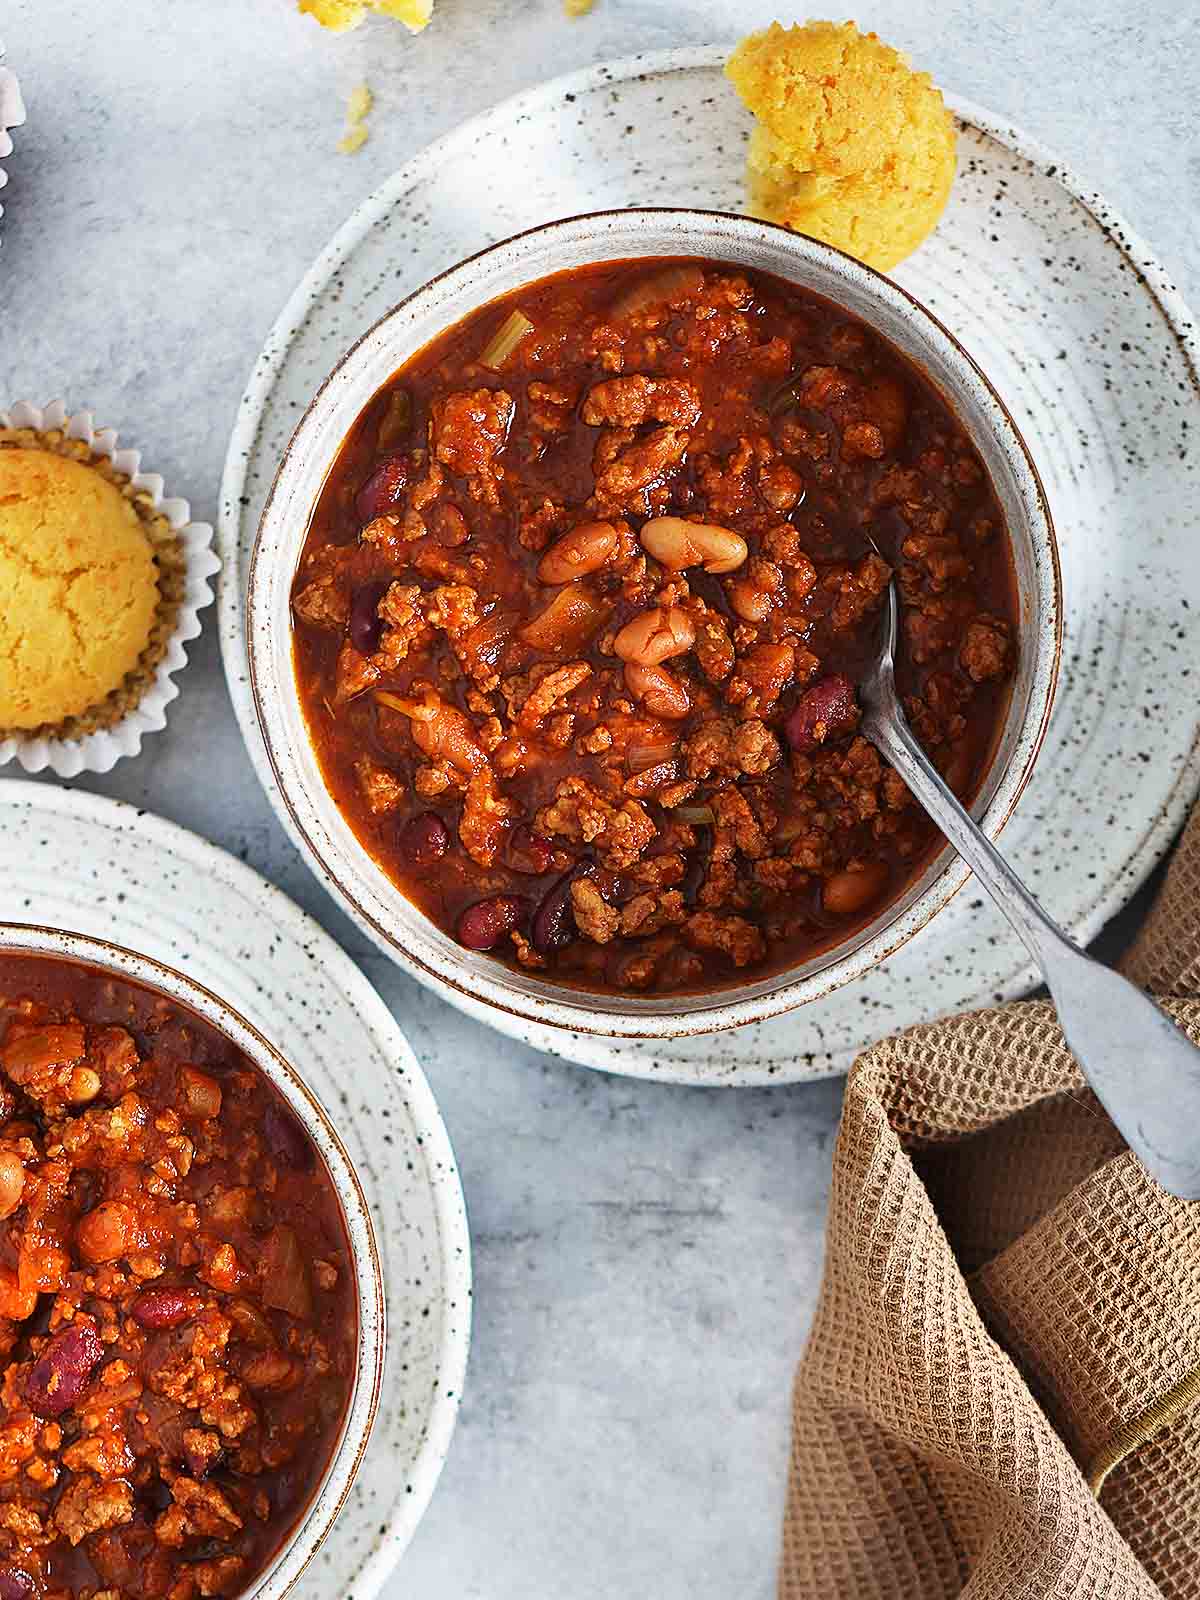 Two white bowls of chili with cornbread muffins on the side.